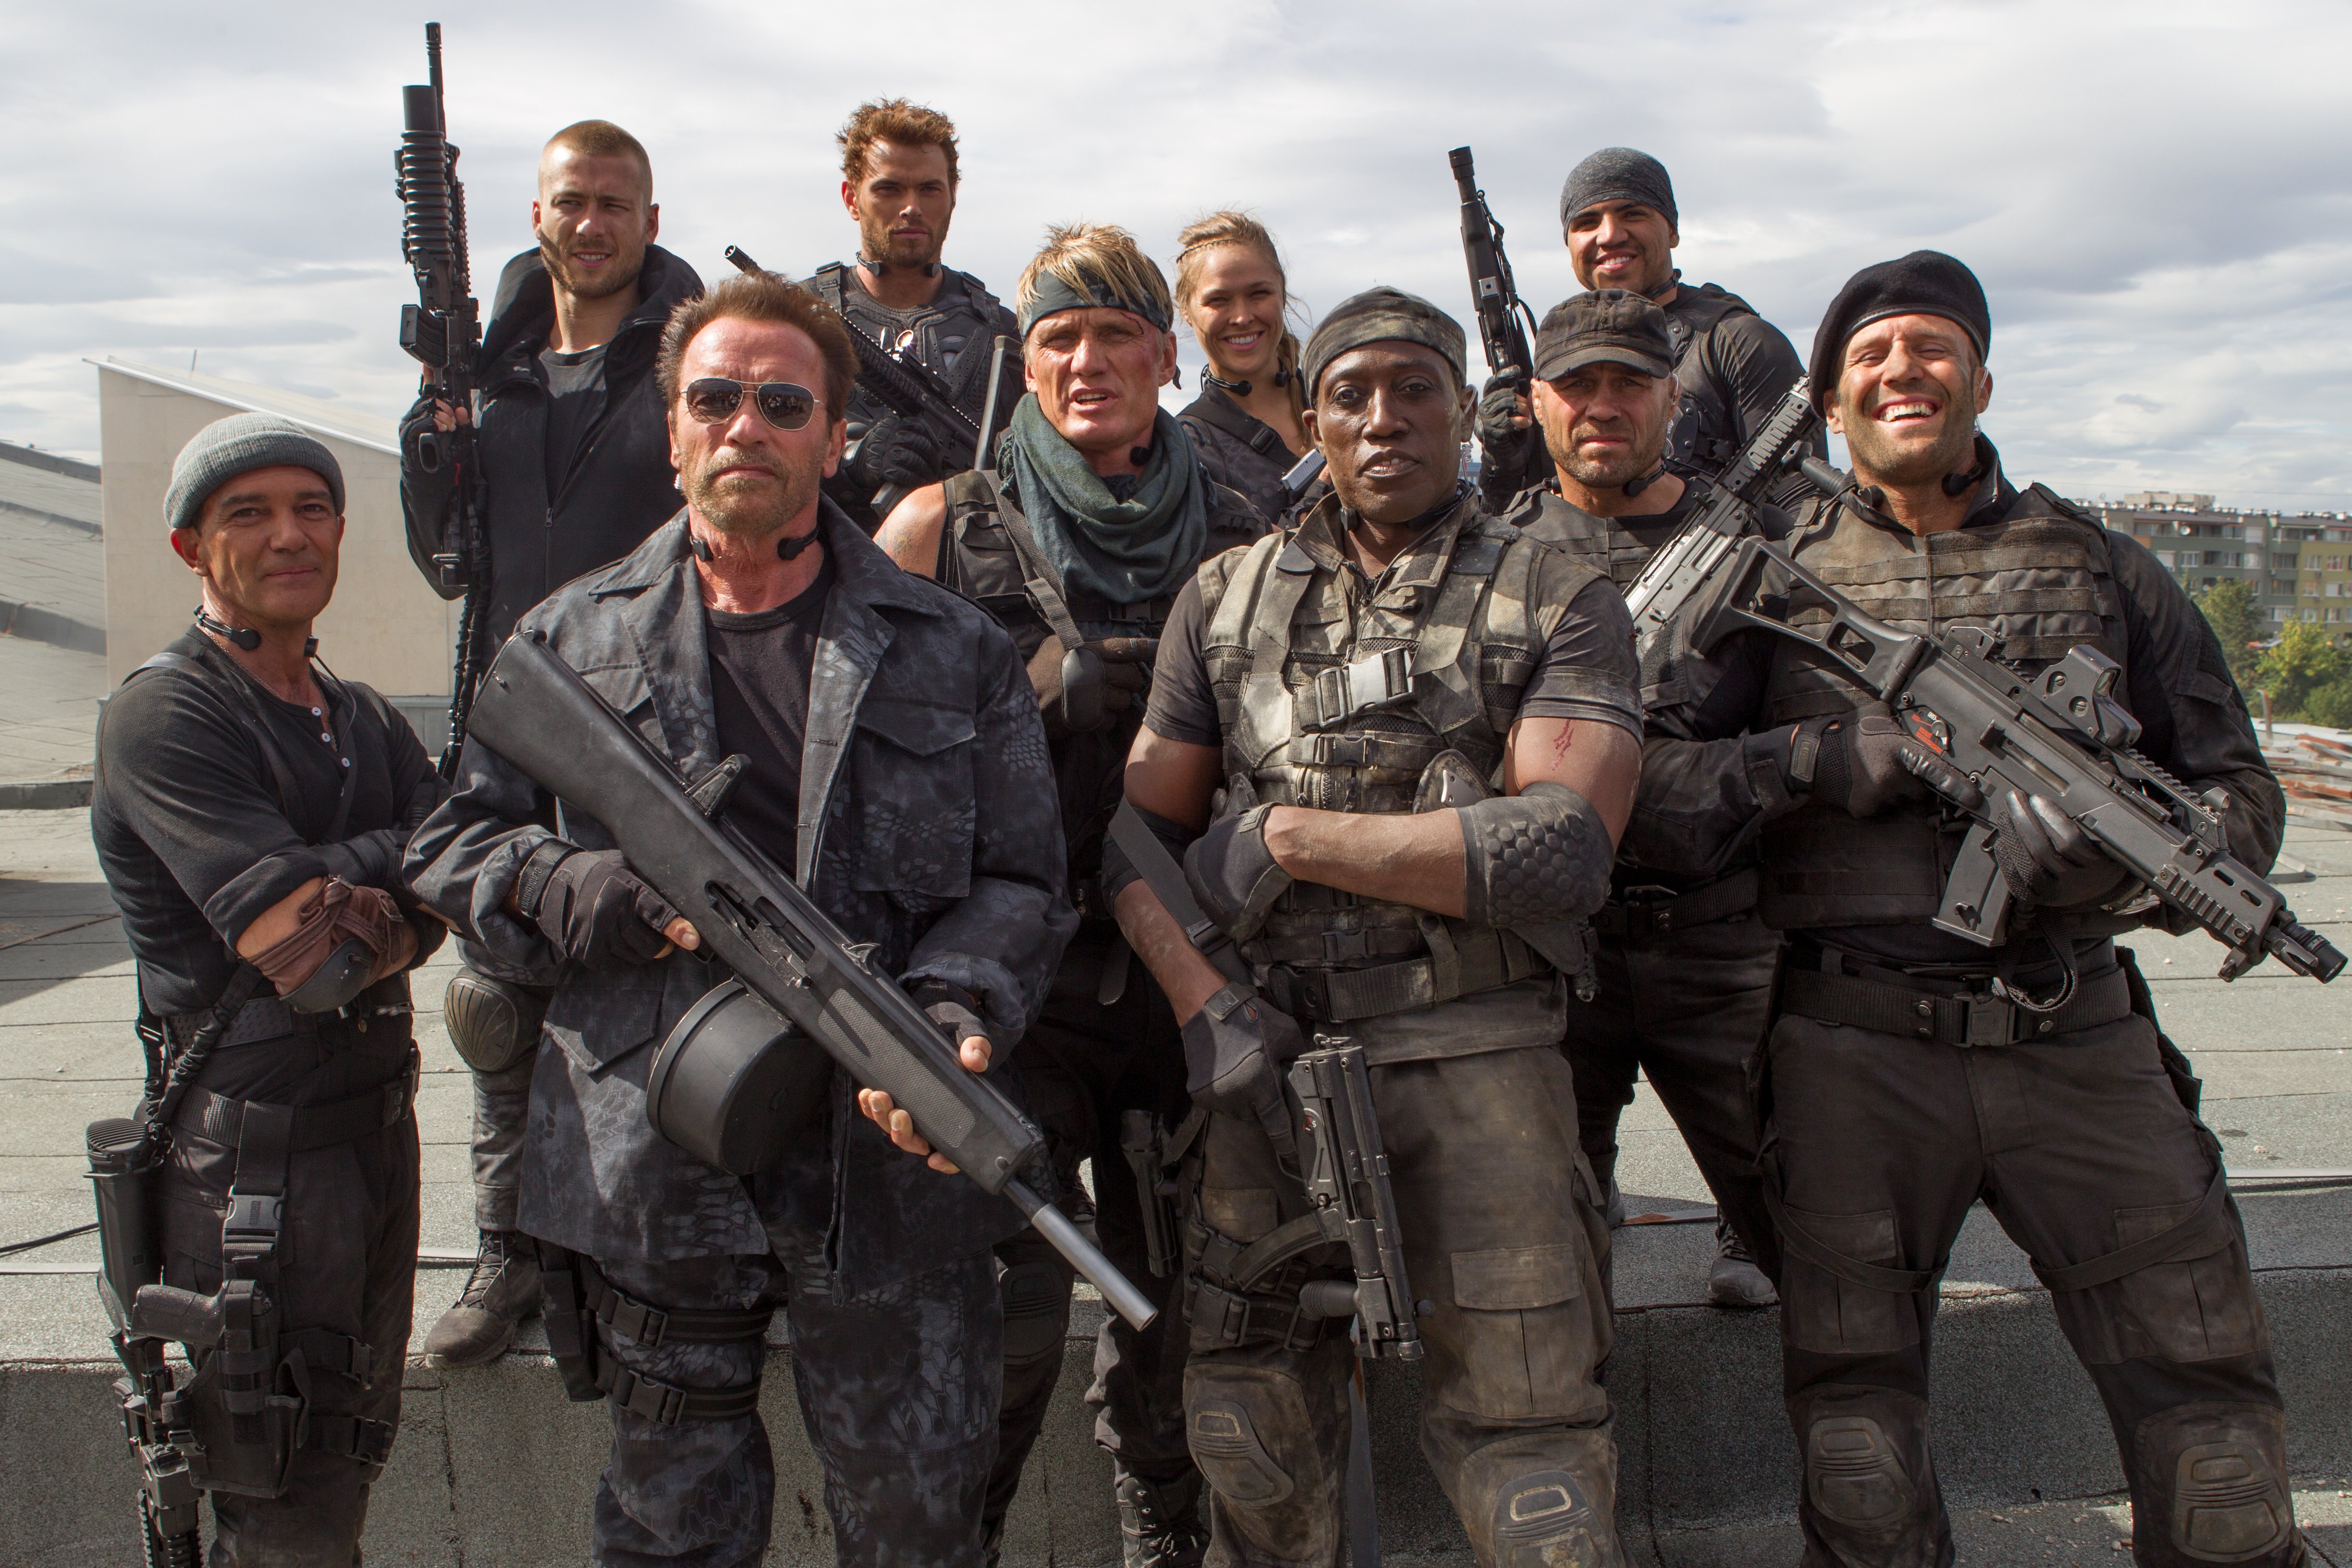 expendables 3 full movie hd free download